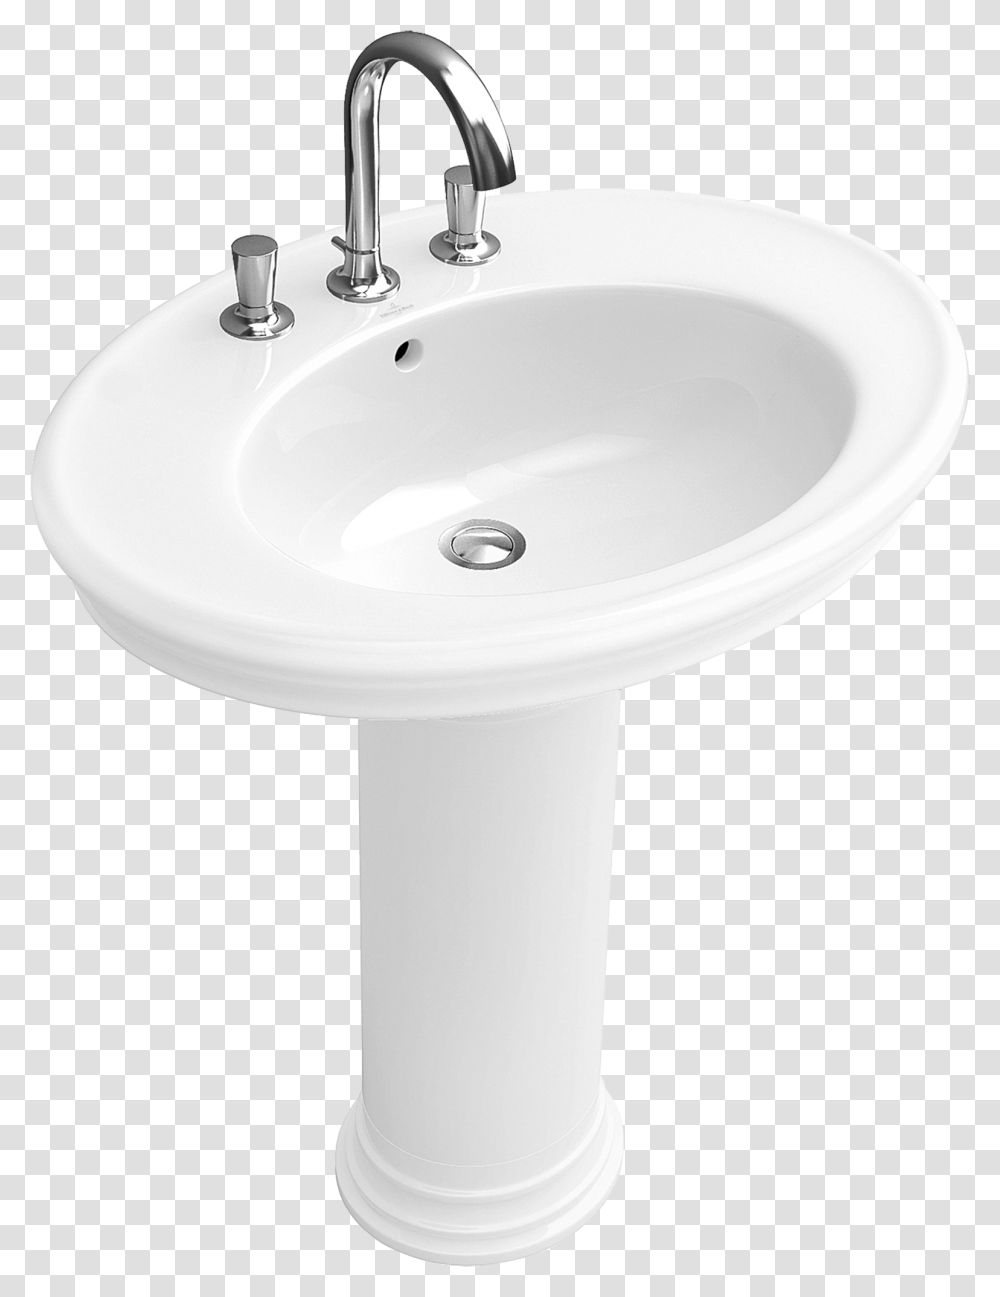 Sink Small Bathroom Sinks Wash Basin Water Tap, Sink Faucet, Indoors Transparent Png